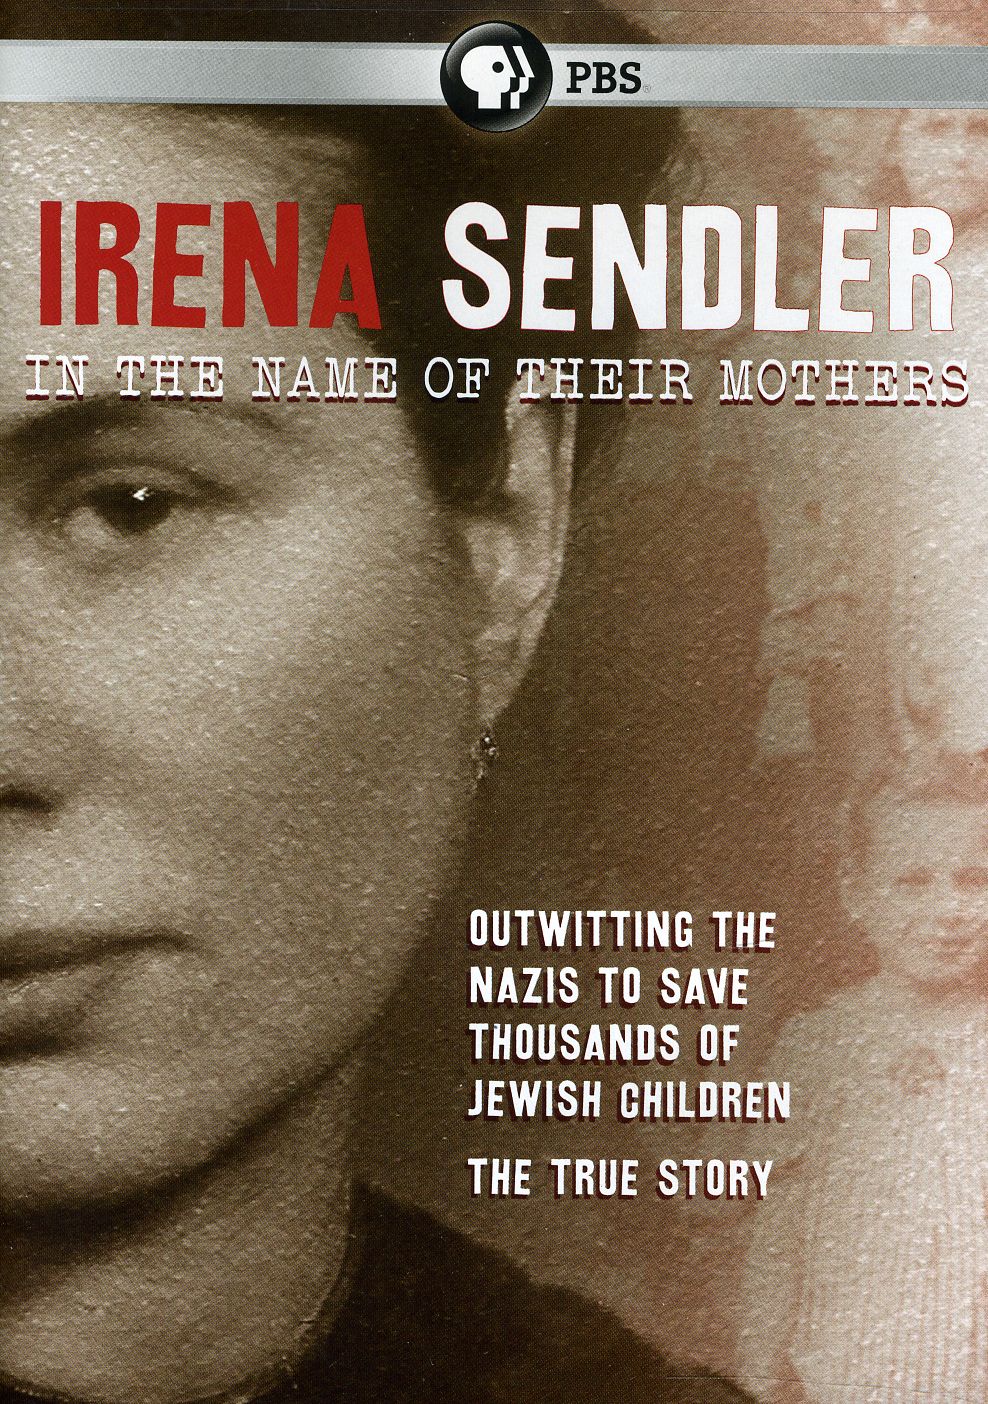 IRENA SENDLER: IN THE NAME OF THEIR MOTHERS